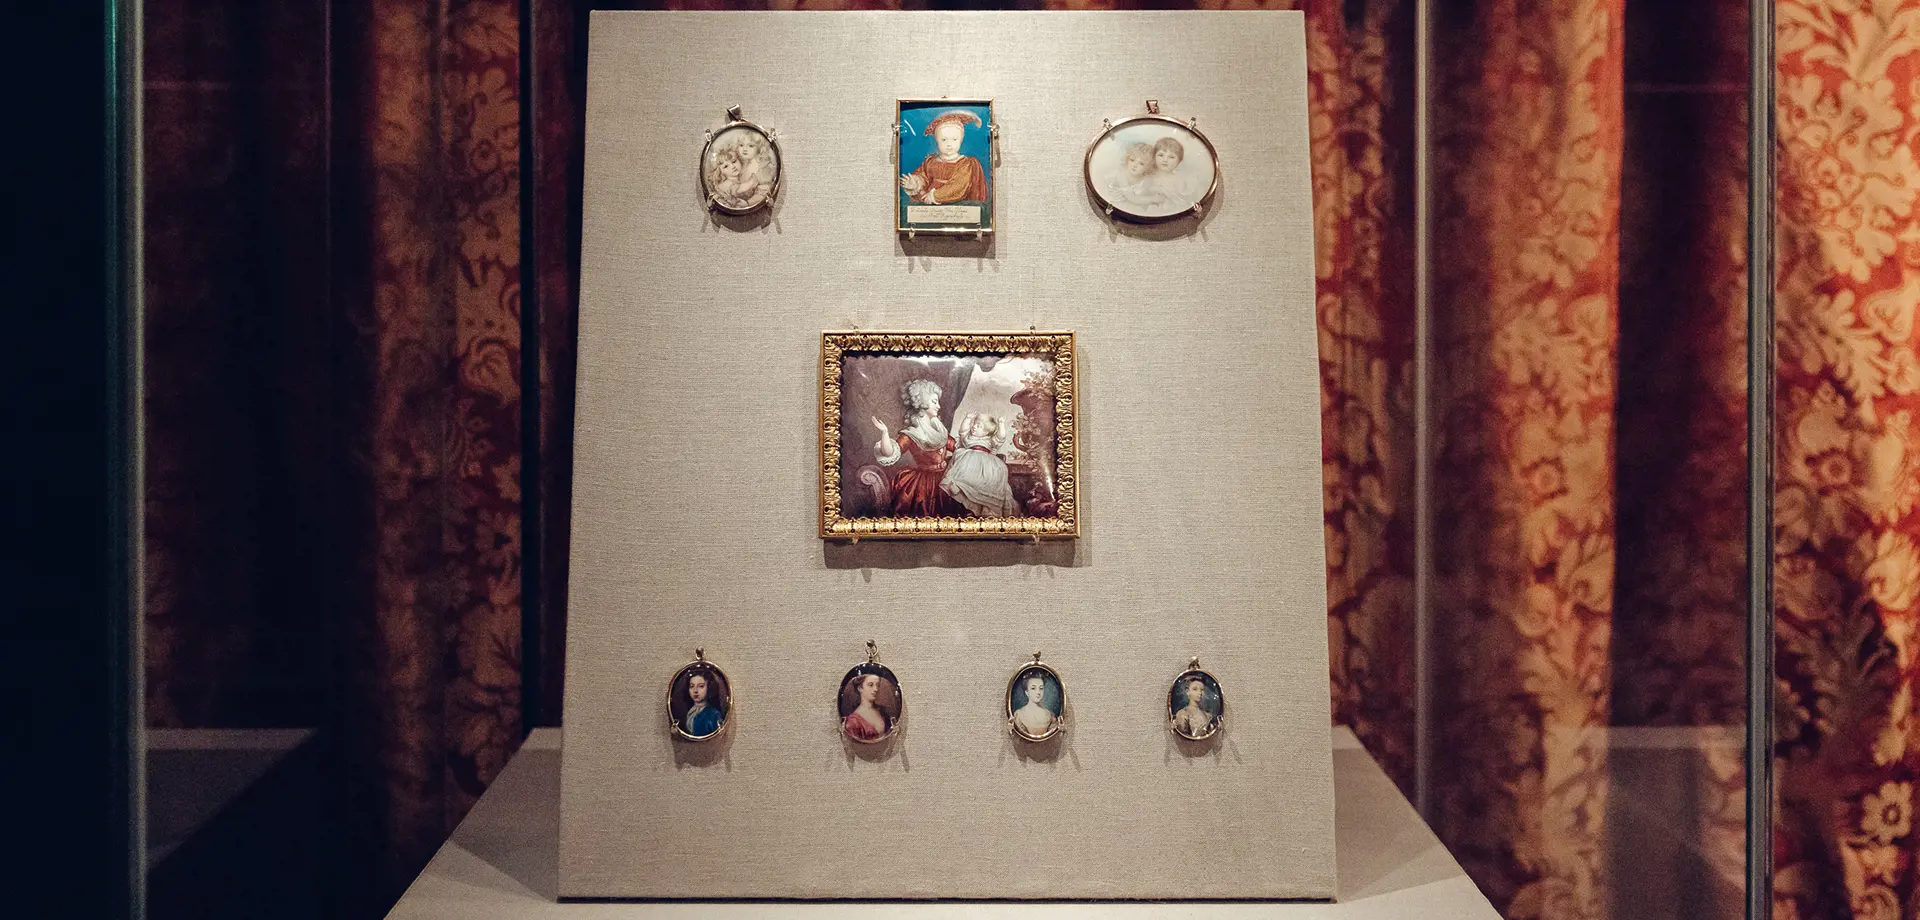 Talk - Childhood in Miniature, with Emma Rutherford